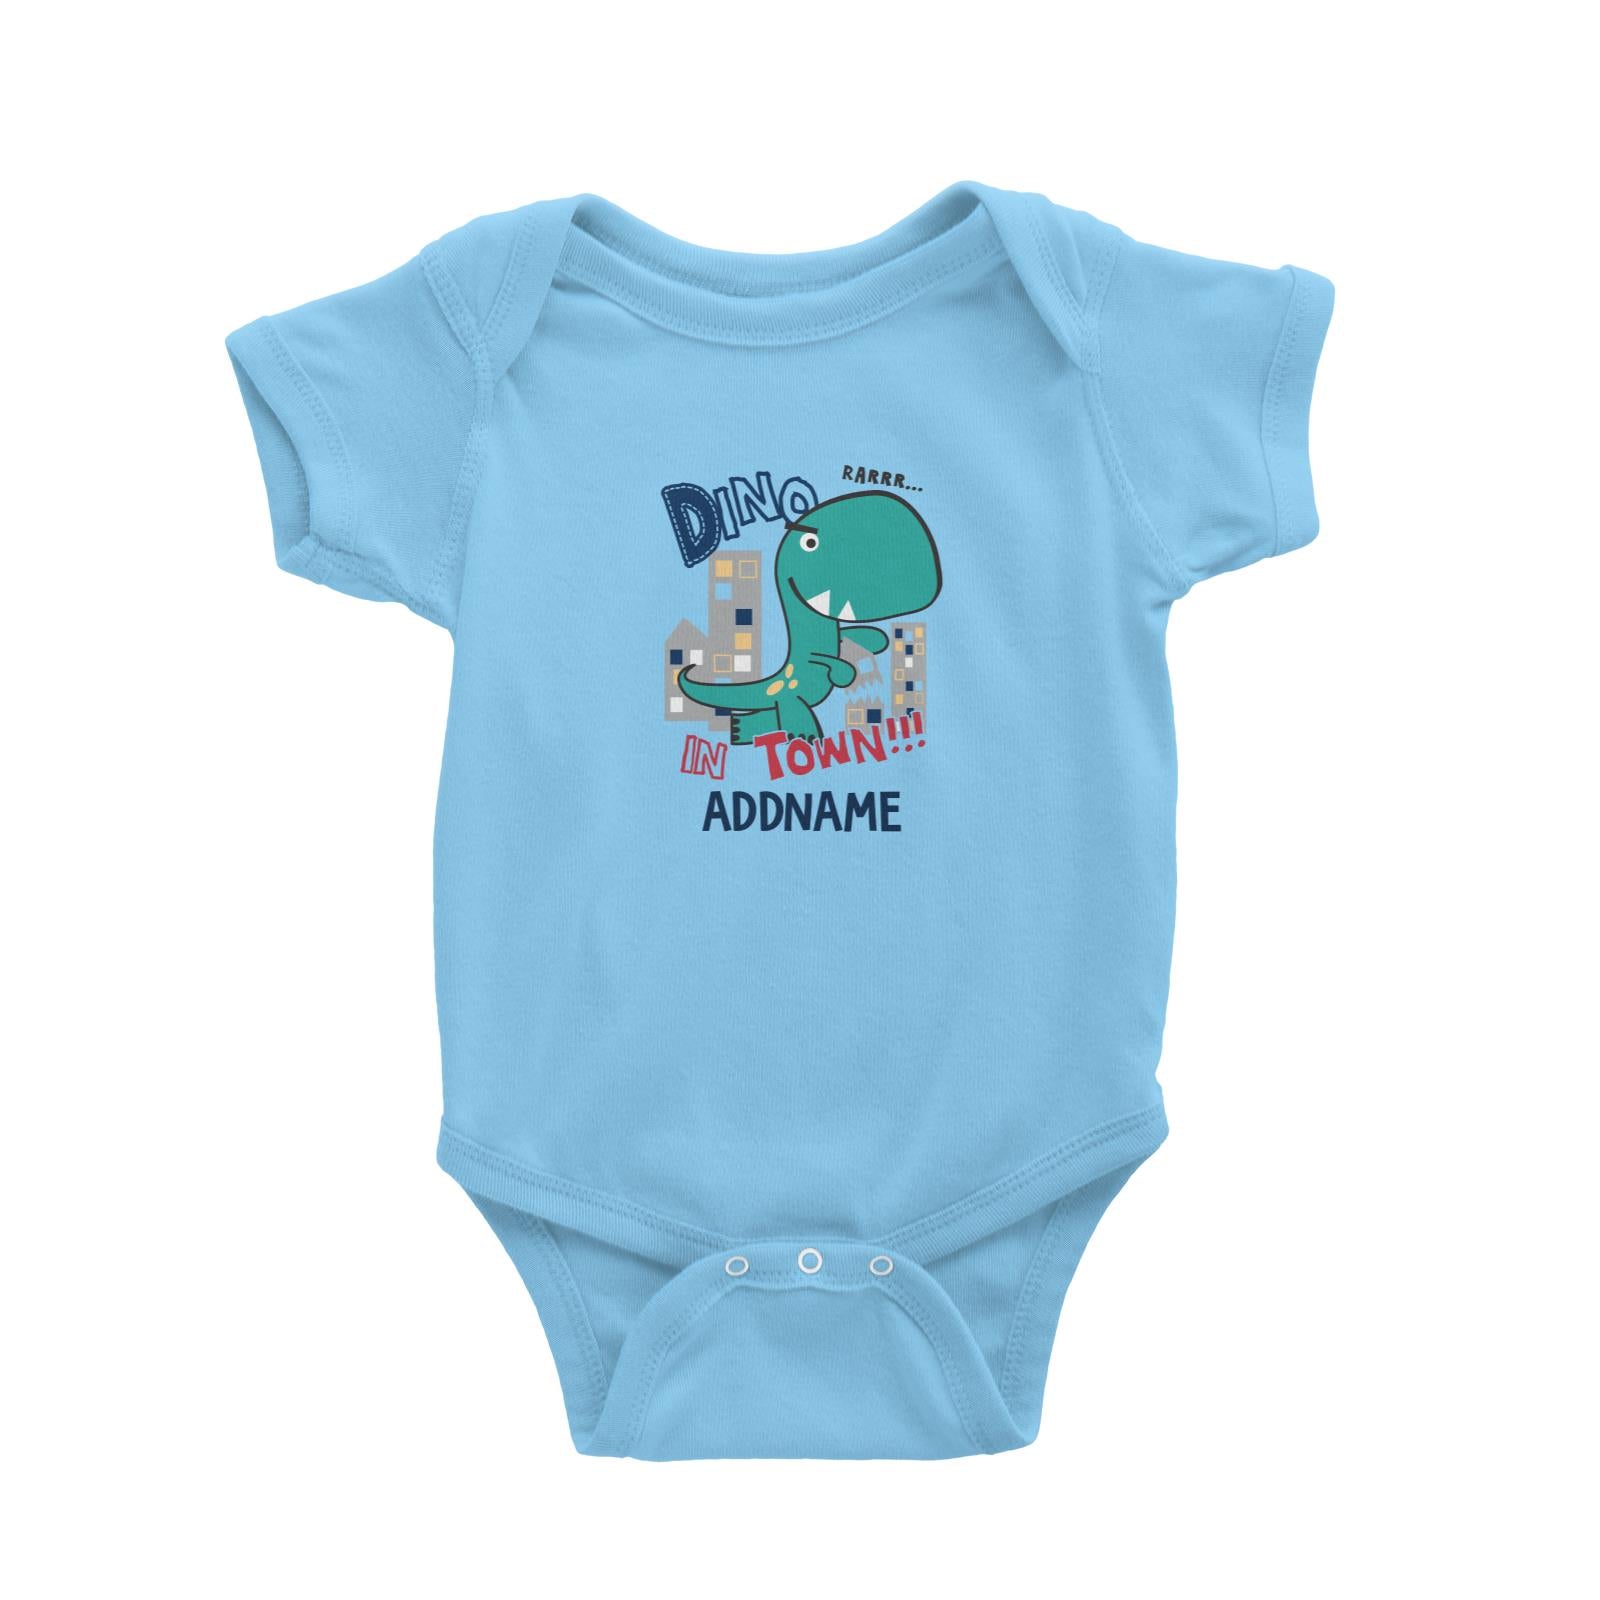 Cool Vibrant Series Dino In Town Addname Baby Romper